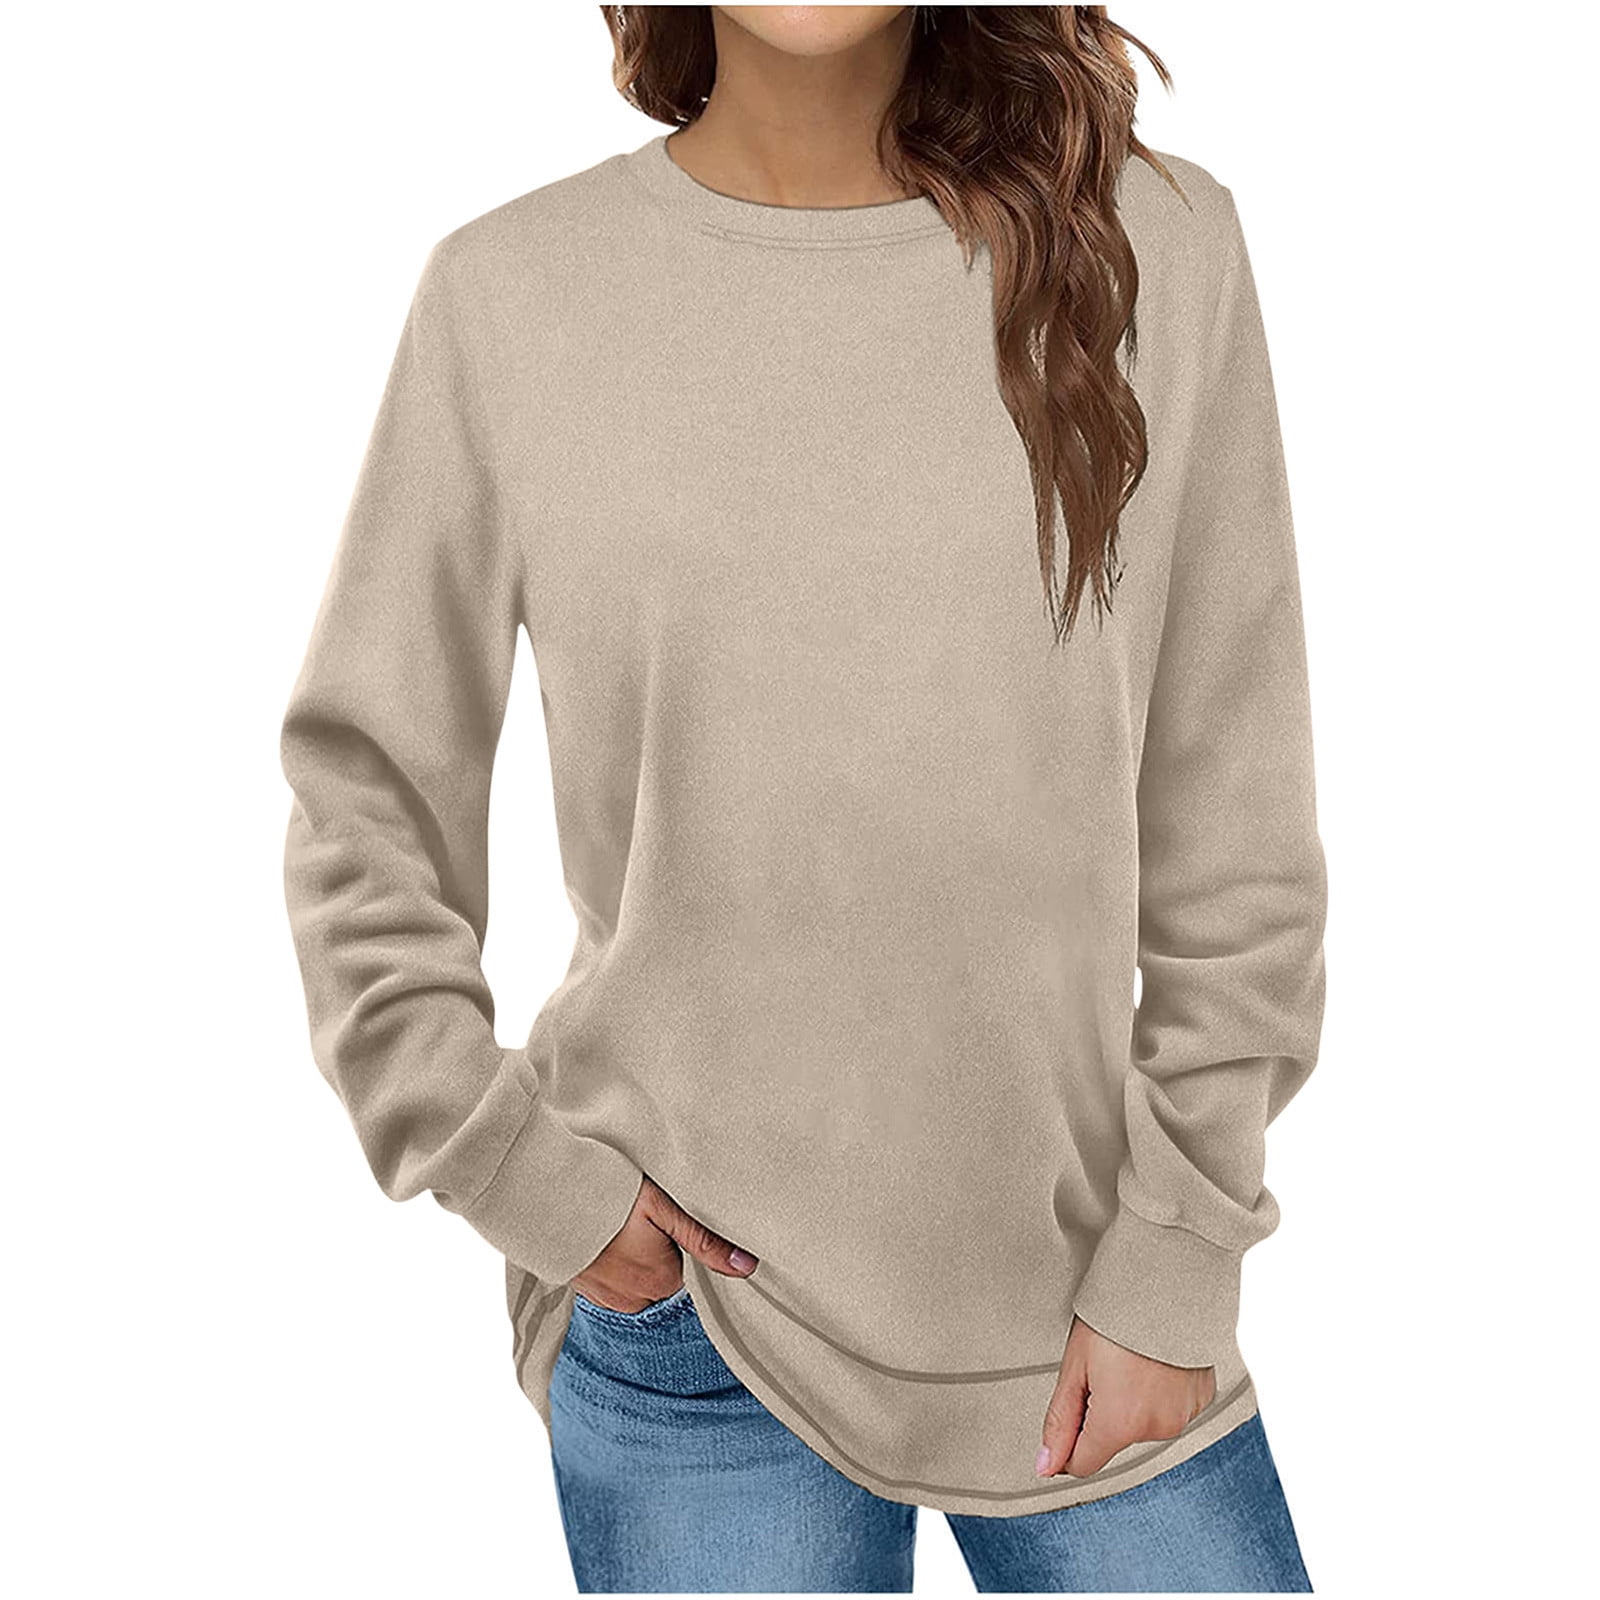 HUCHPI Sweatshirts for Women Trendy Casual Loose Fit Long Sleeve Crew Neck  Comfy Soft Cute Pullover Tunic Tops